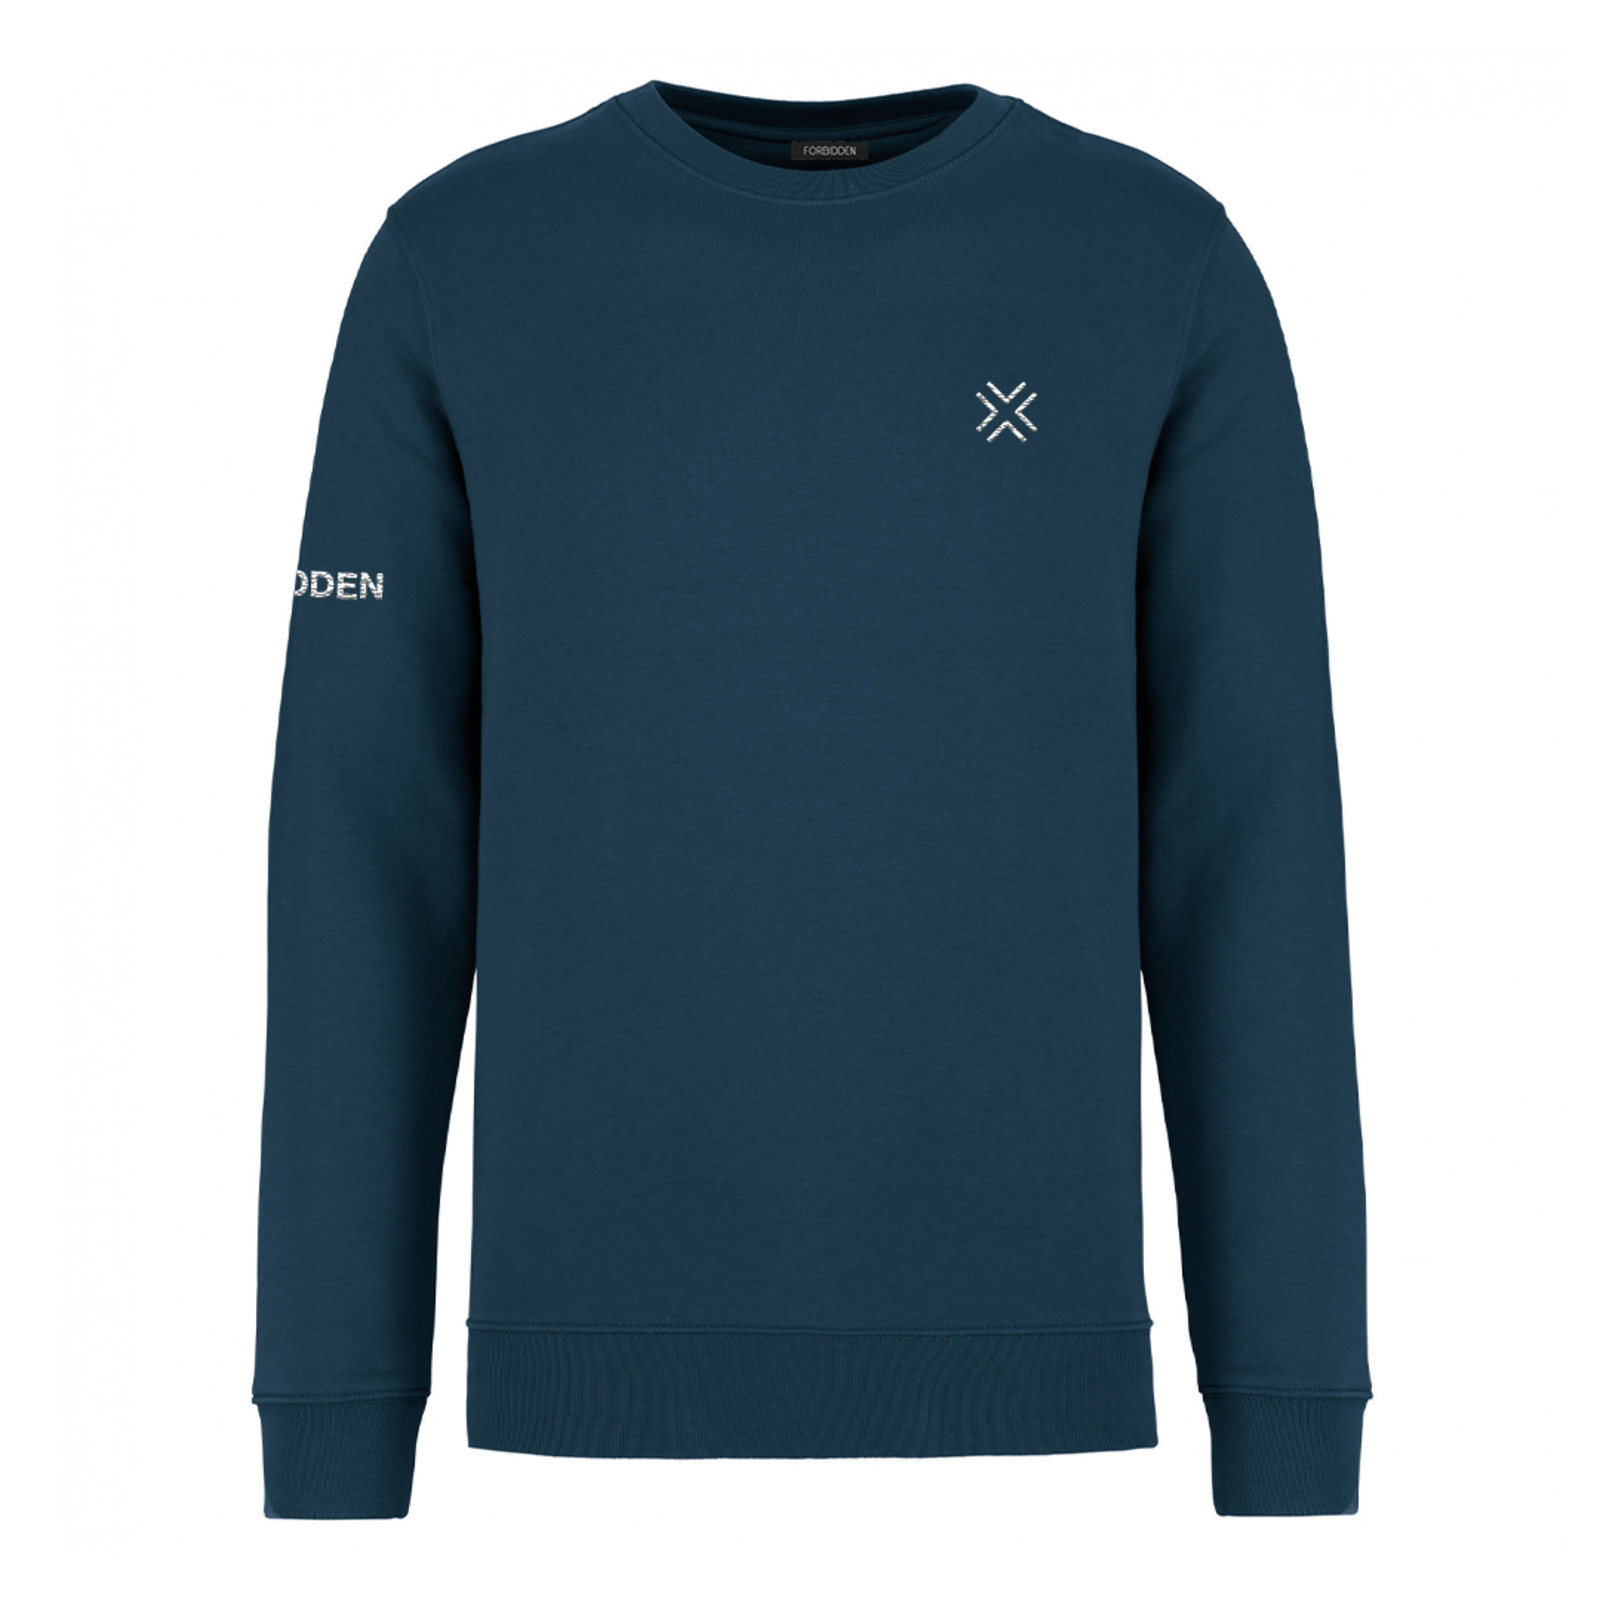 Sweater  embroidered logo - Peacockblue